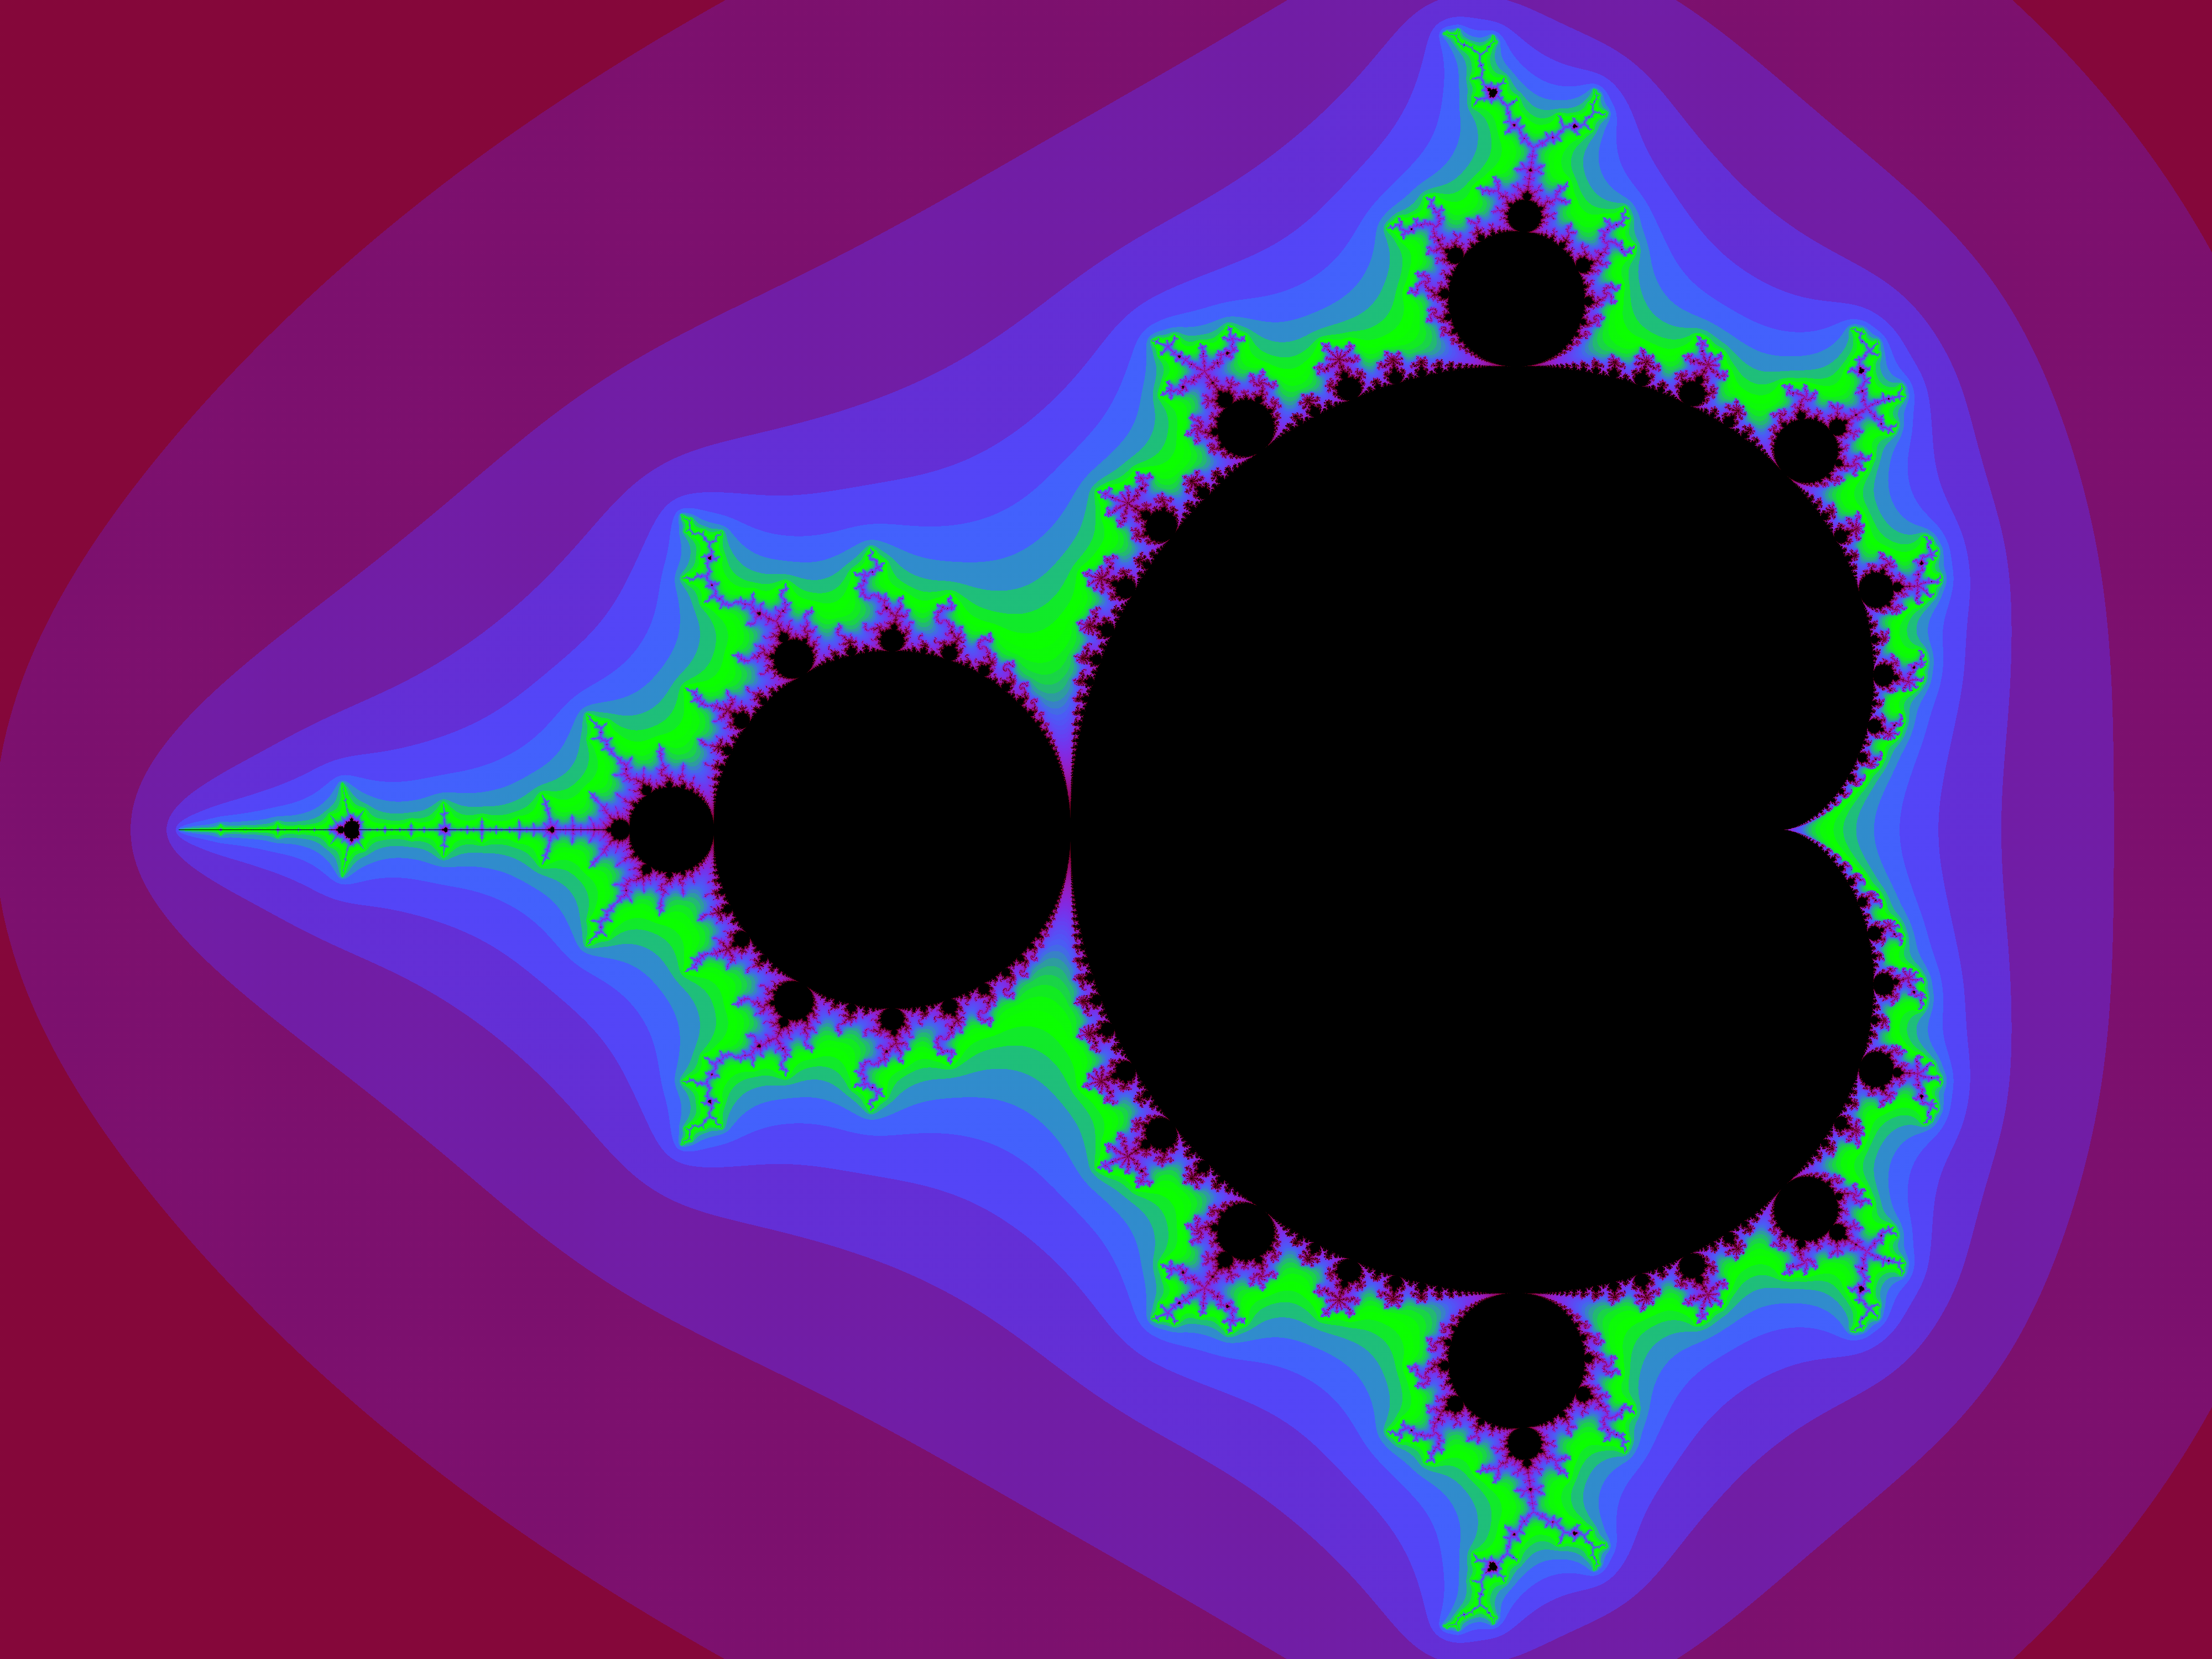 Mandelbrot_set_with_coloured_environment.png